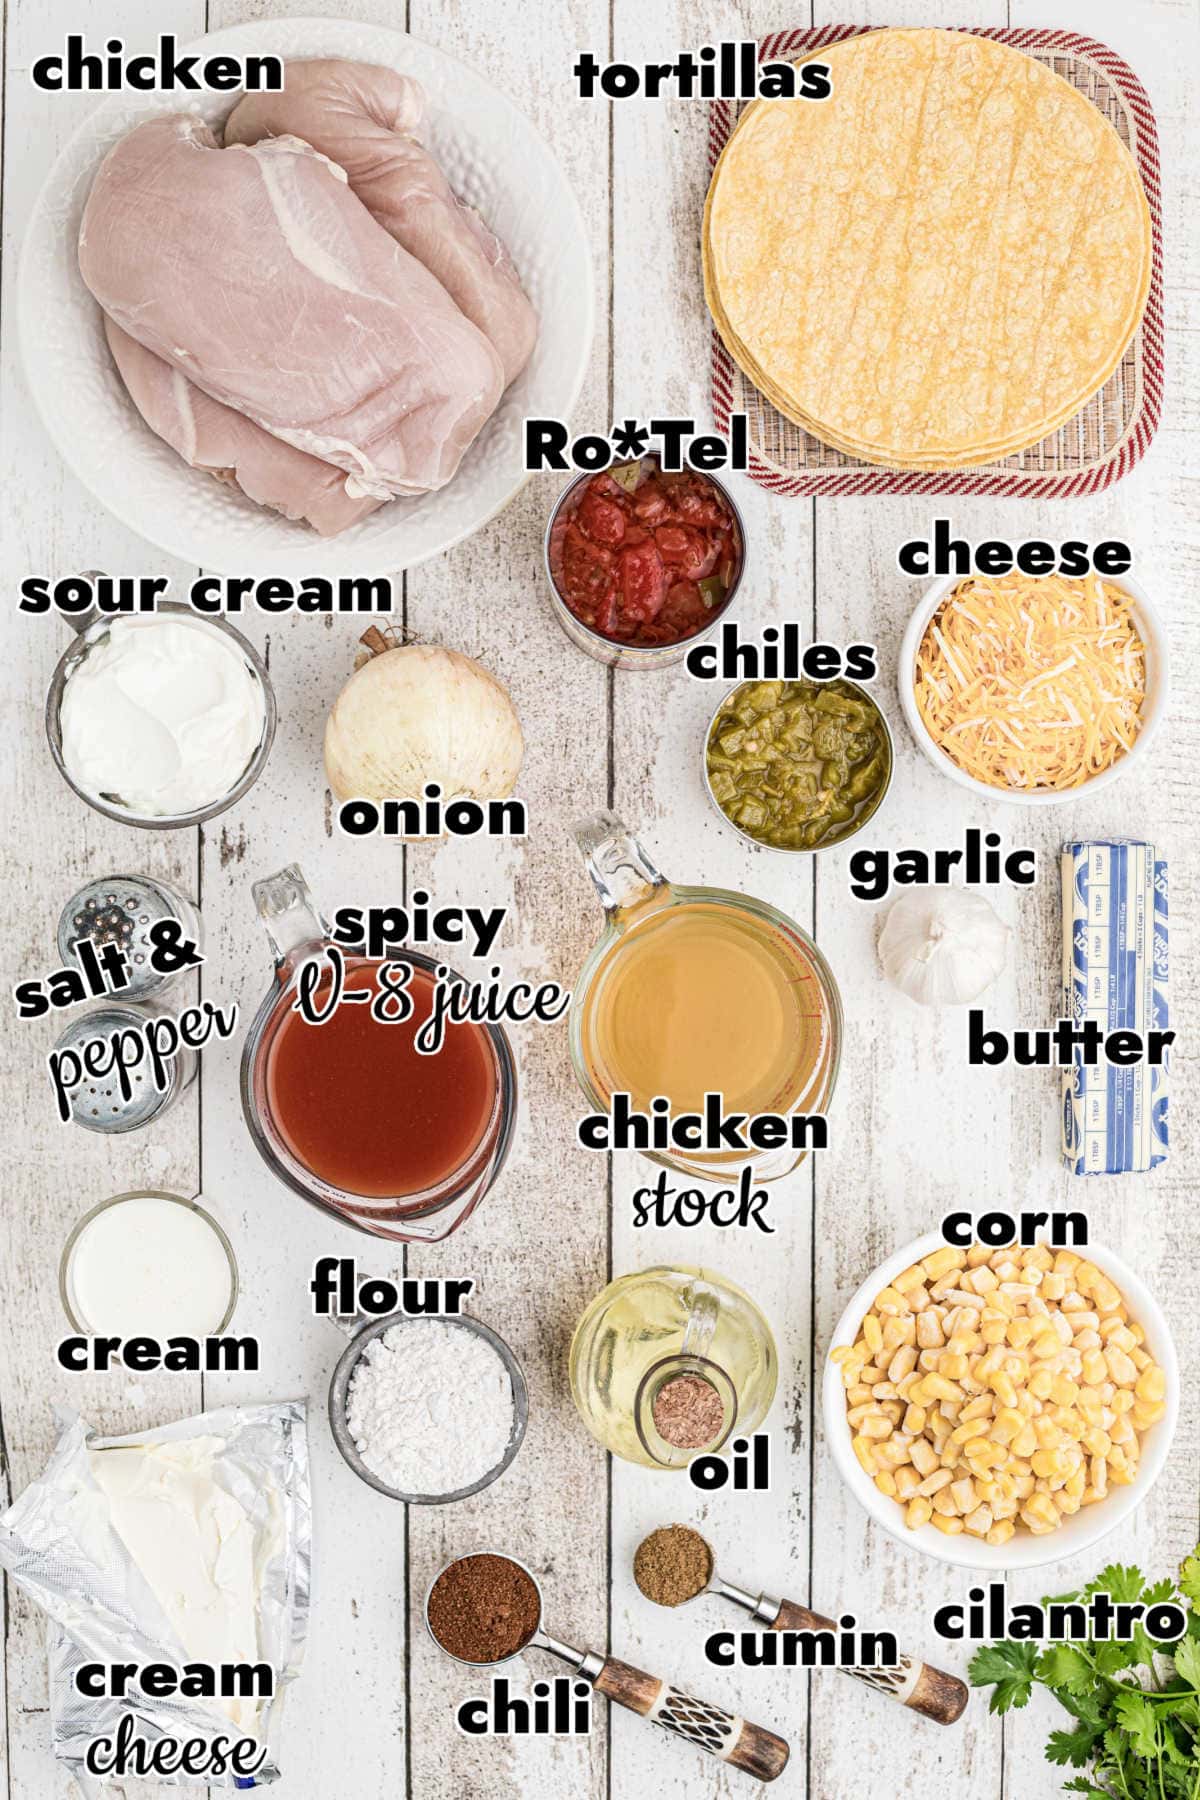 Ingredients for chicken enchiladas on a table.